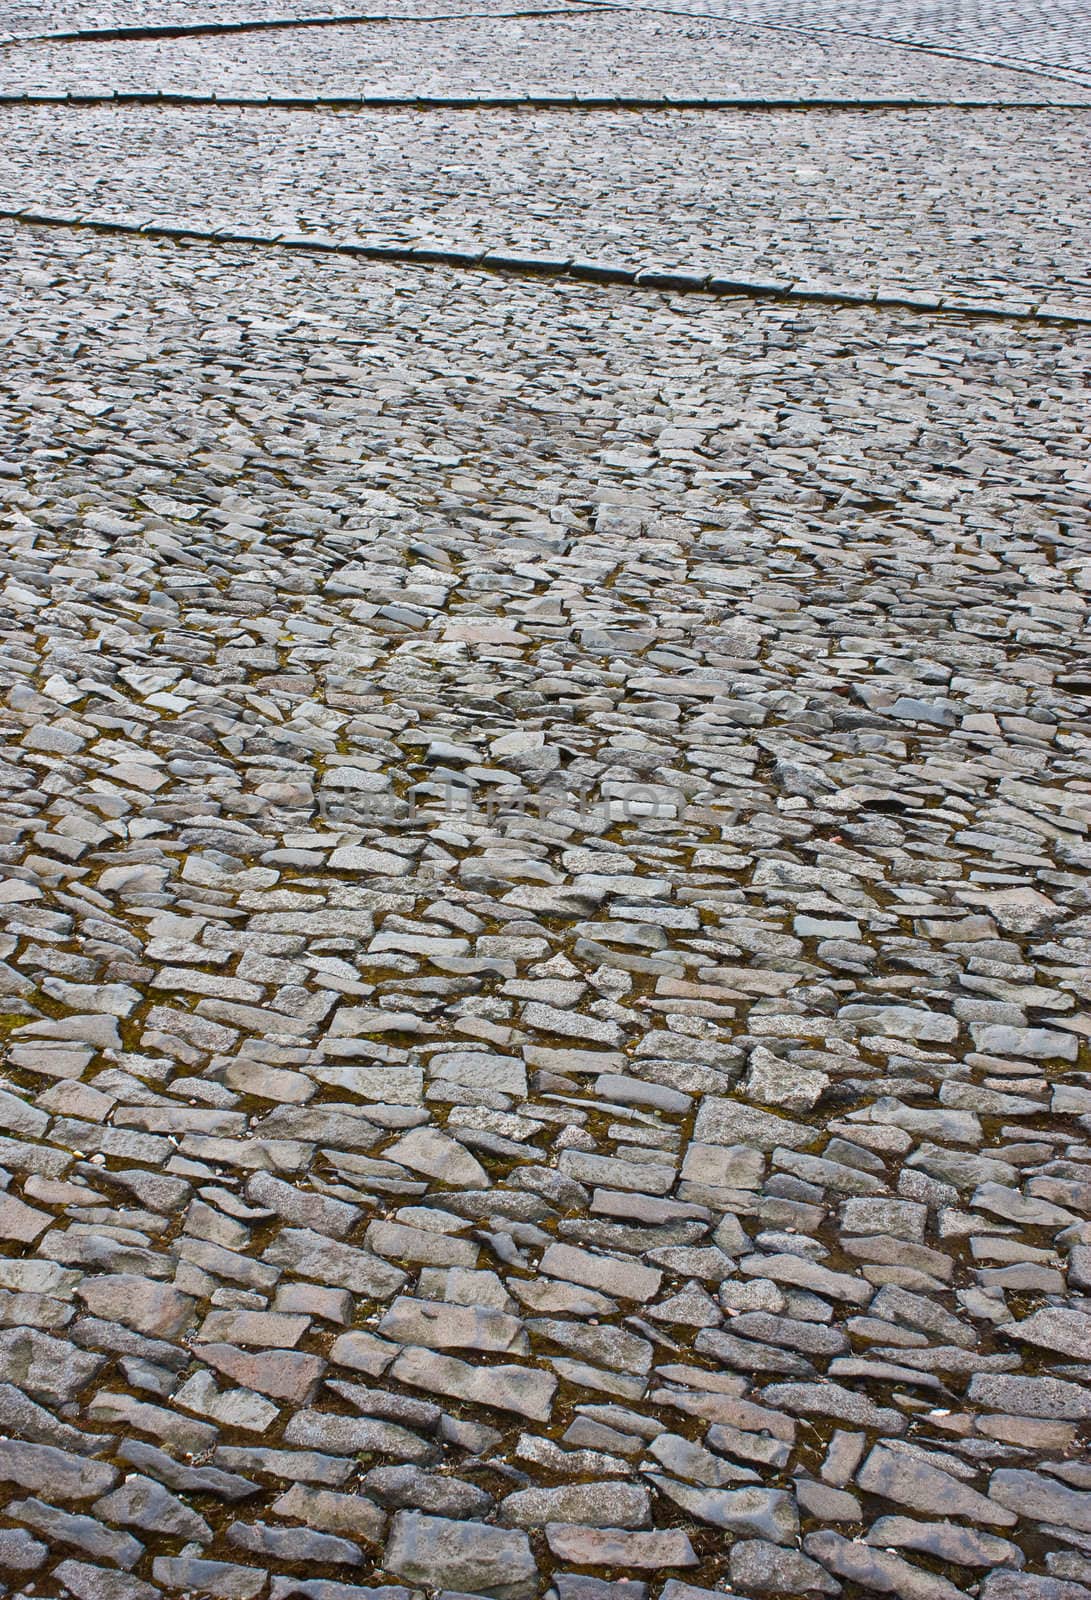 Path made of stone with small steps, Edimburgh